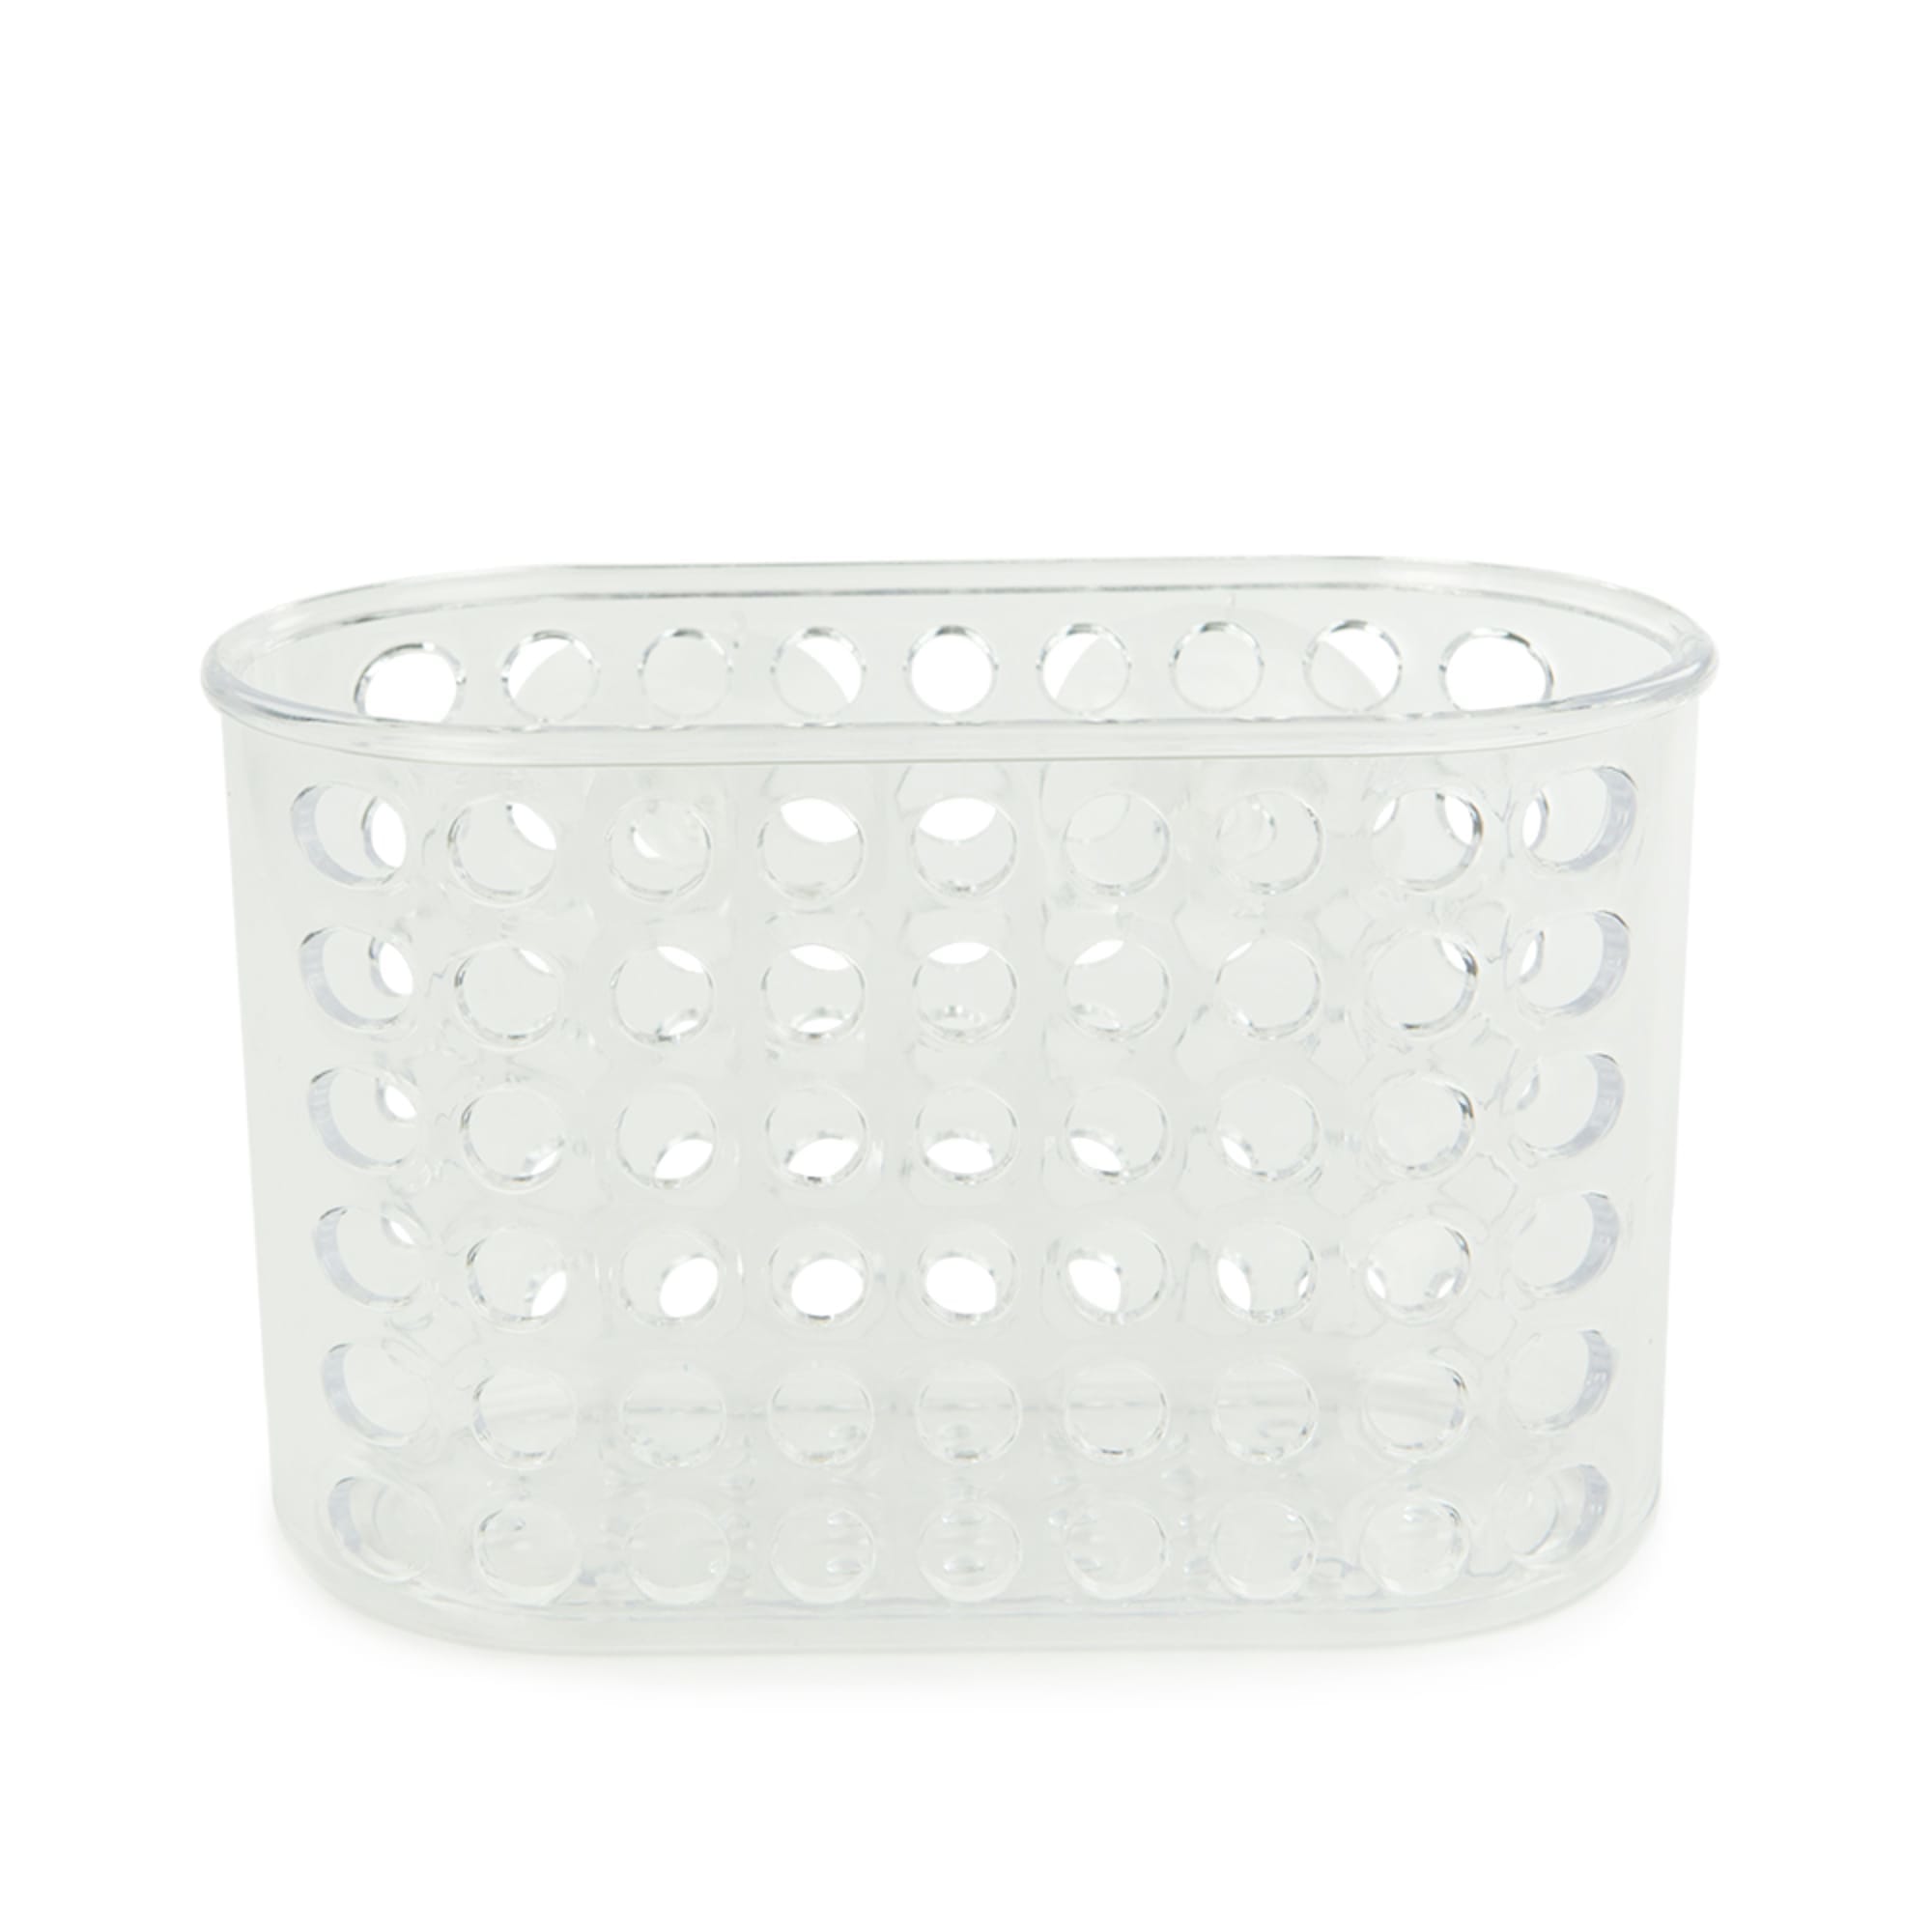 Home Basics Large Plastic Bath Caddy with Suction Cups, Clear $2.50 EACH, CASE PACK OF 24